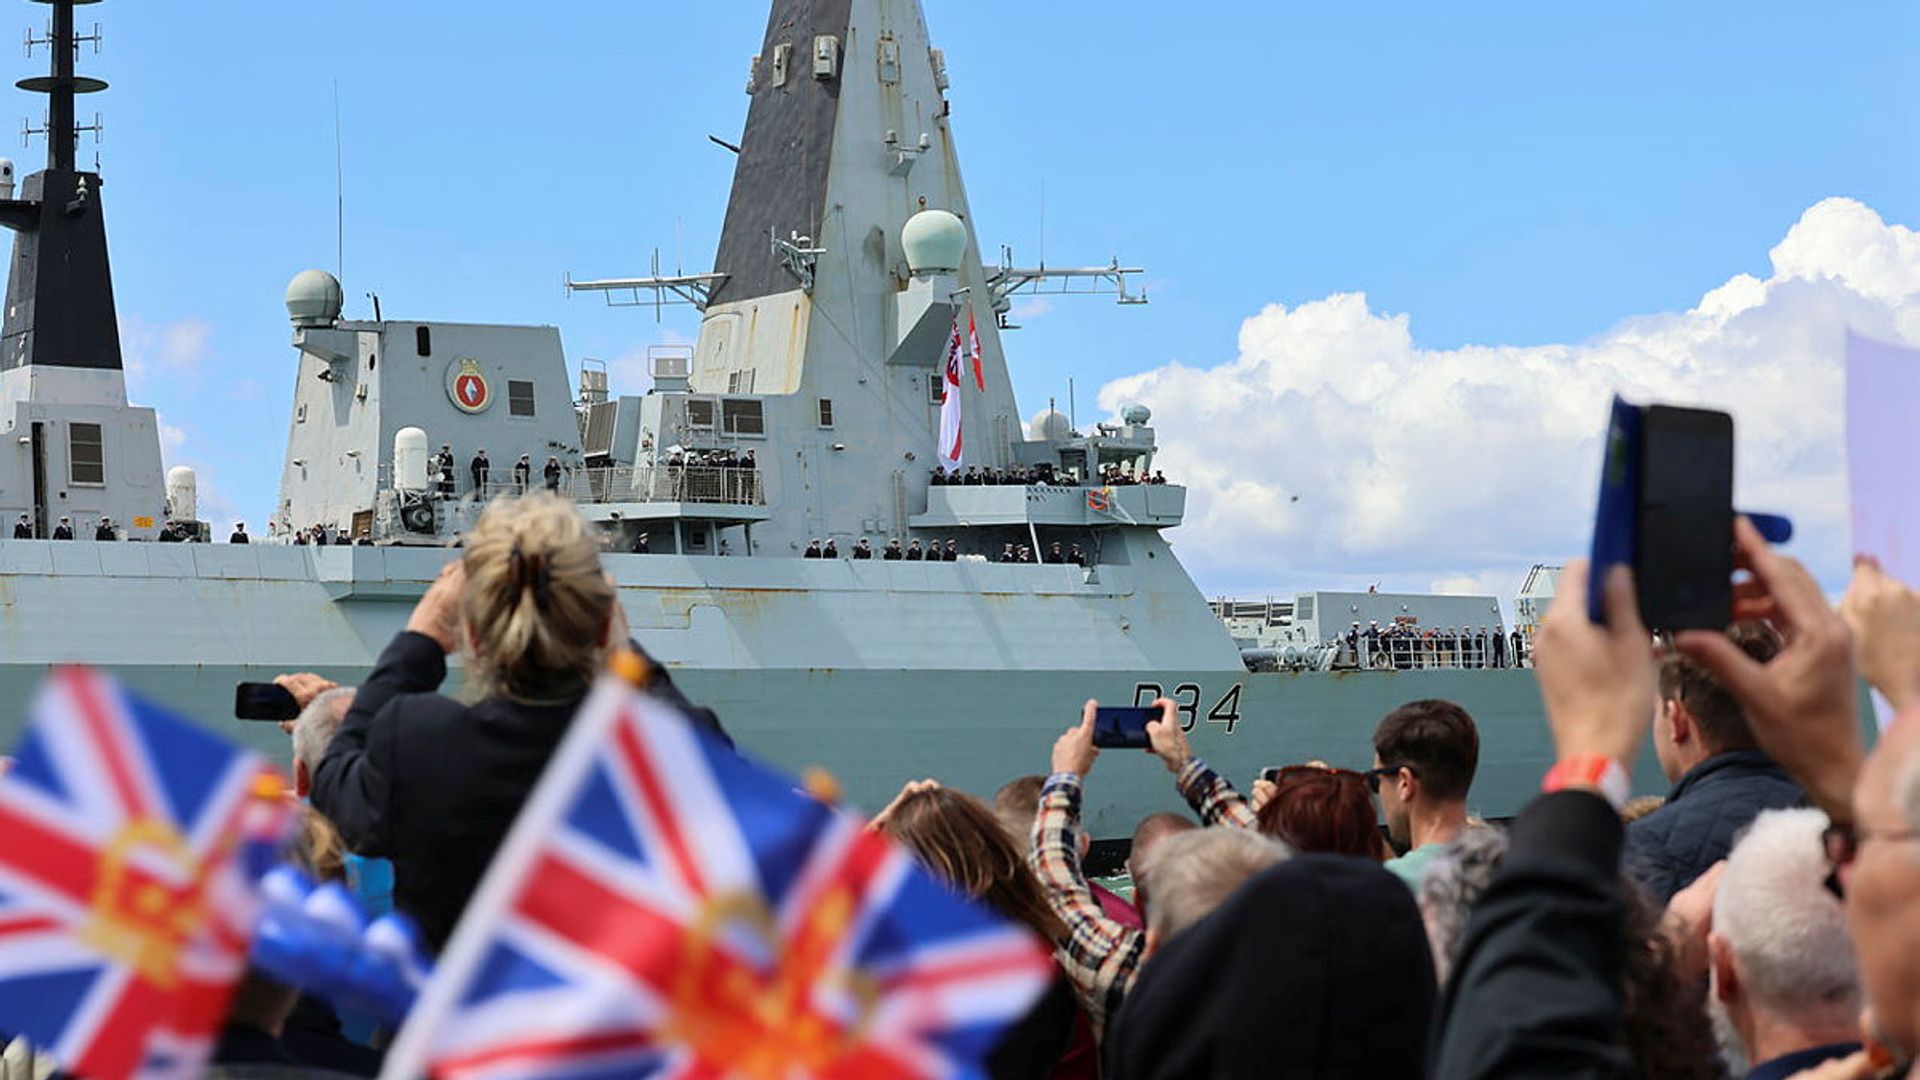 Warship returns home after landmark trip - but new defence secretary misses the action